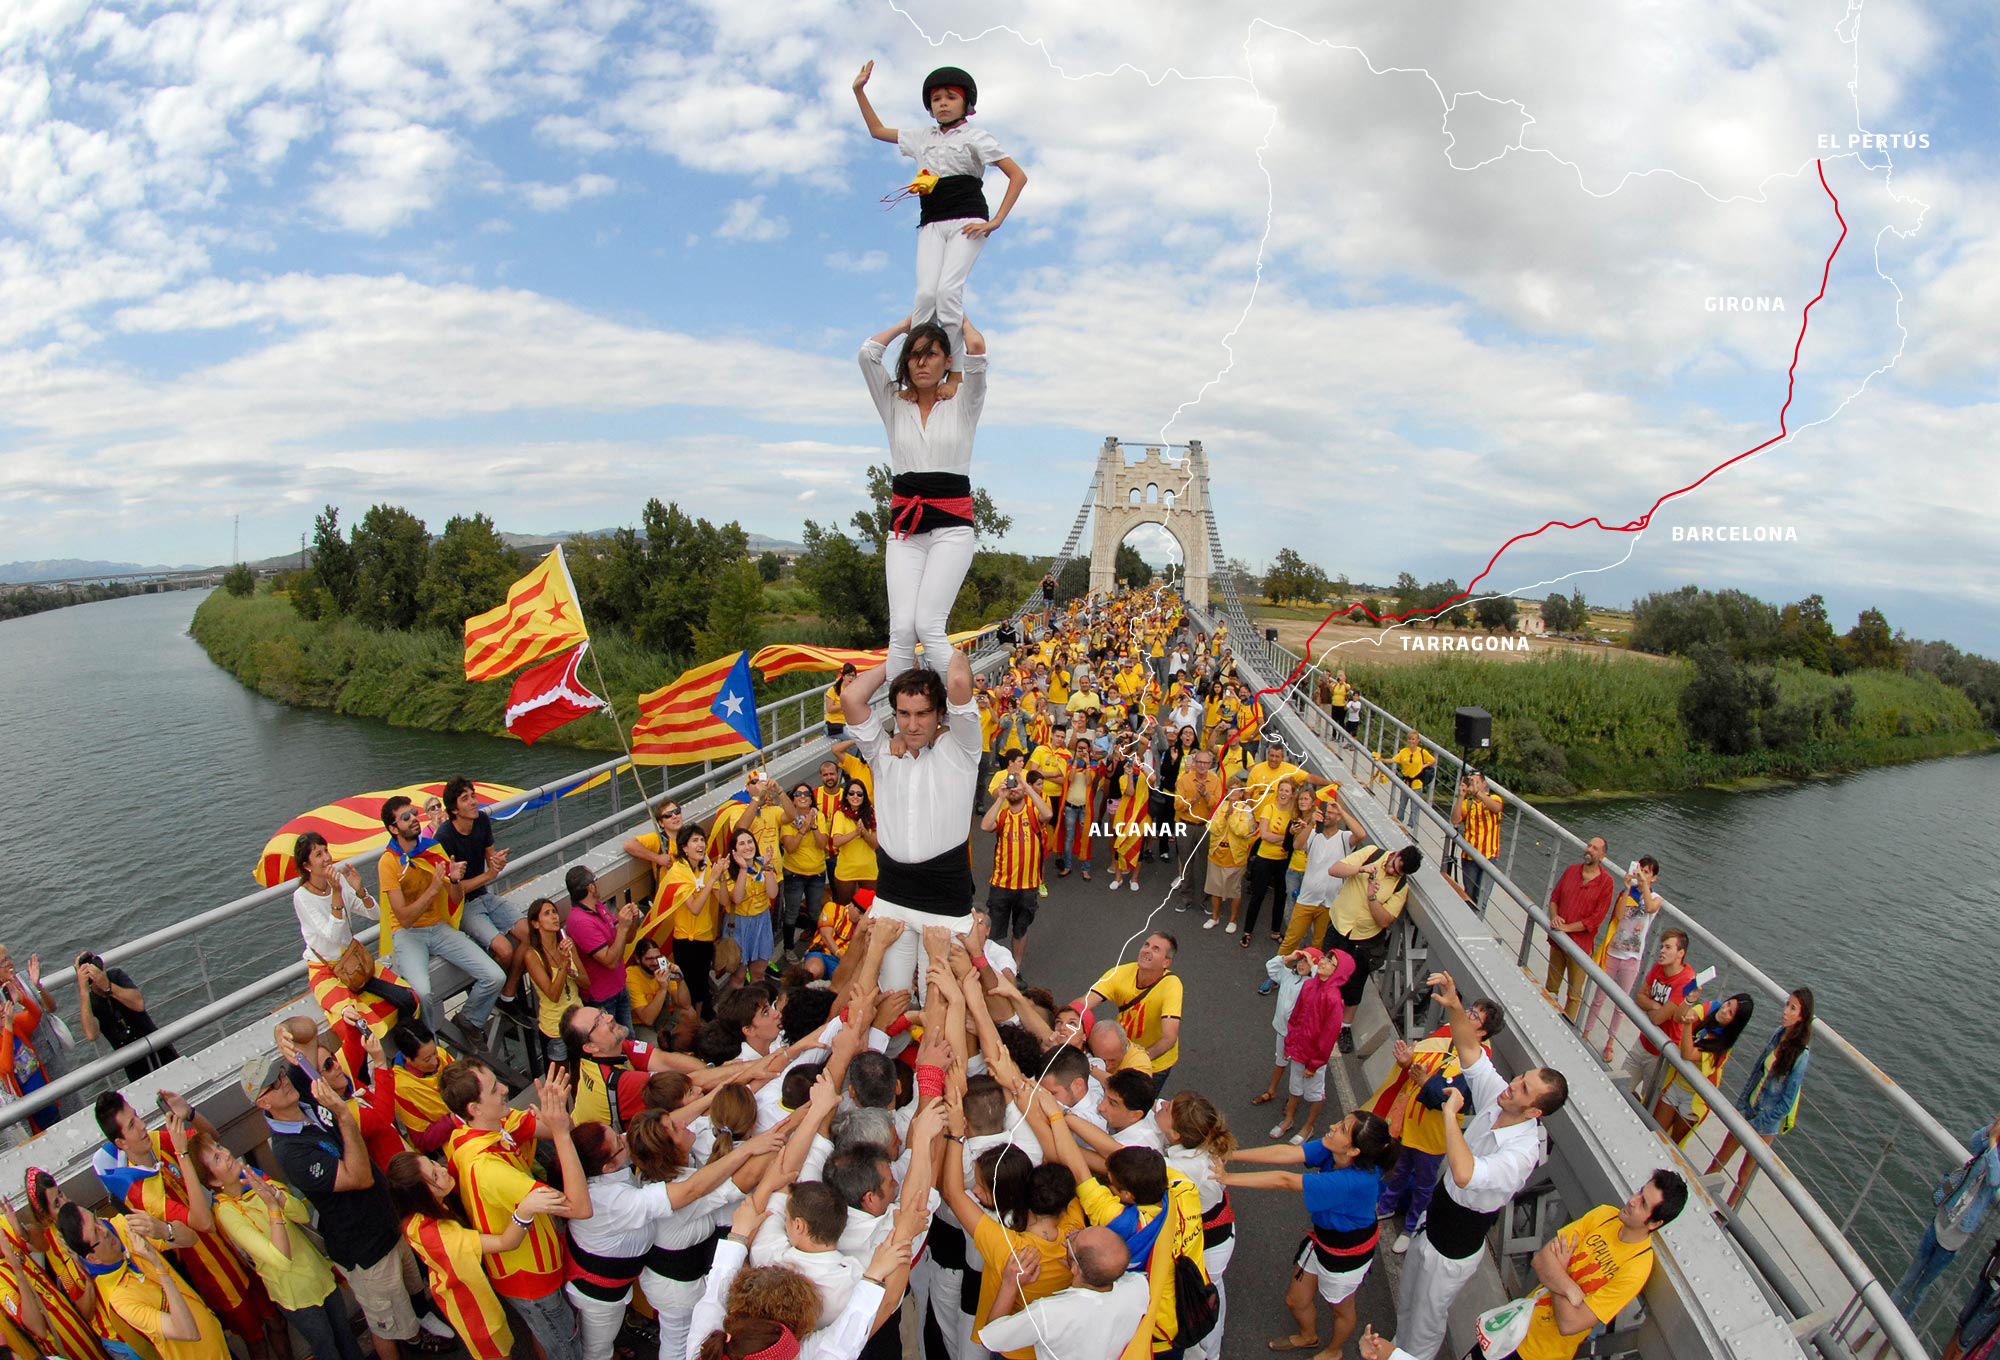 The 11th of September 2013. Inspired by the Baltic Way in 1989, the Assemblea Nacional Catalana (Catalan National Assembly), called for a giant human chain extending from north to south through the country.